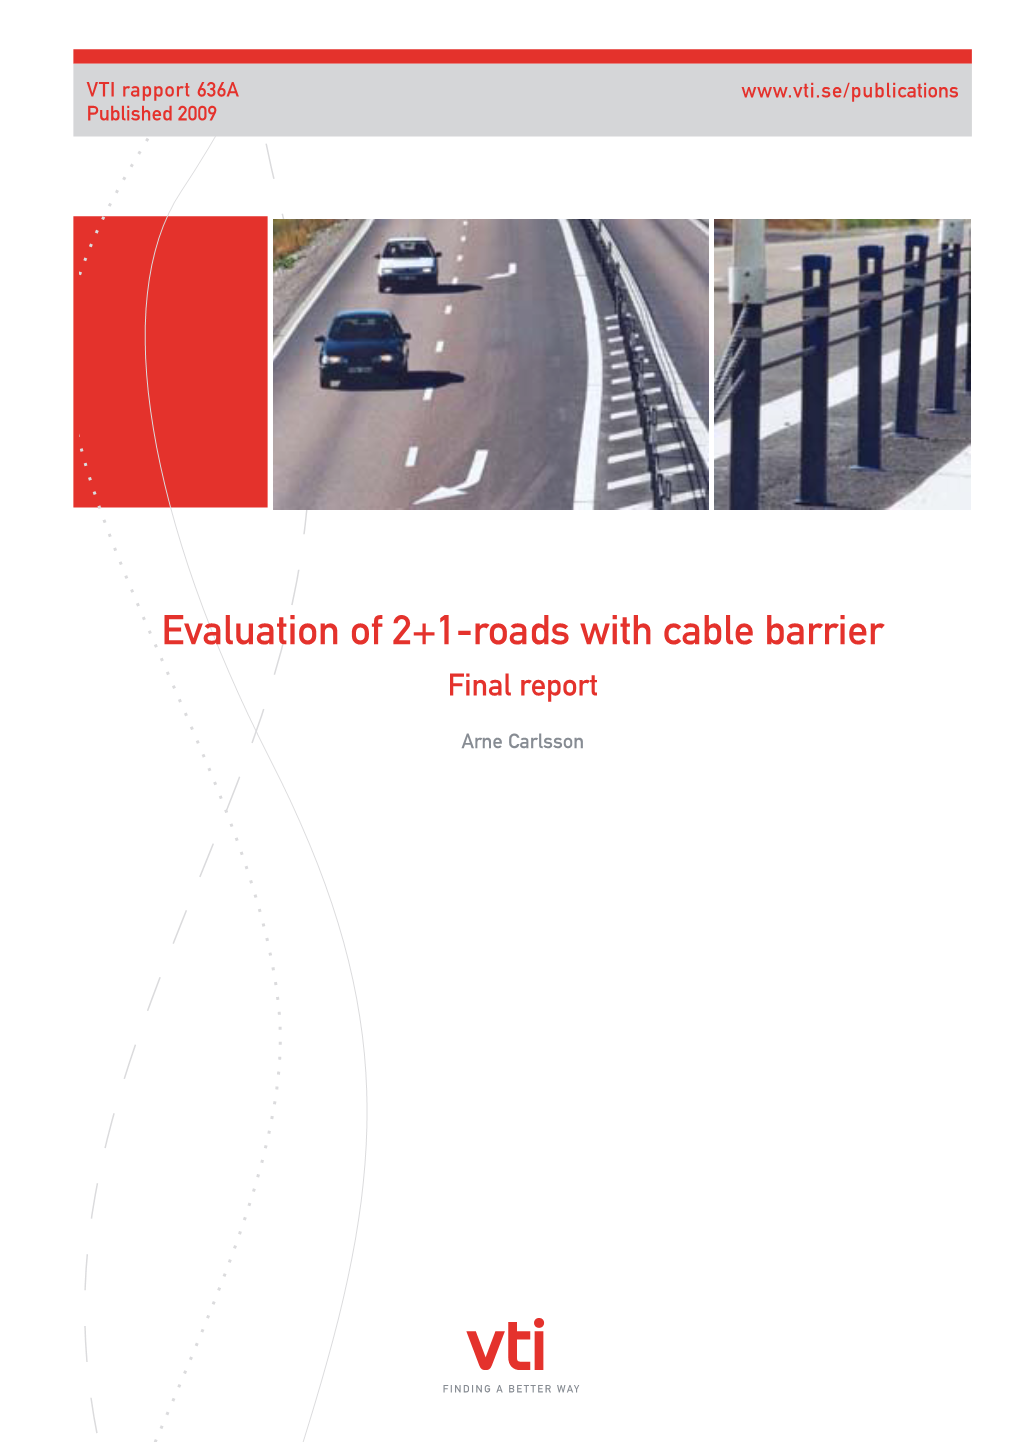 Evaluation of 2+1-Roads with Cable Barrier Final Report